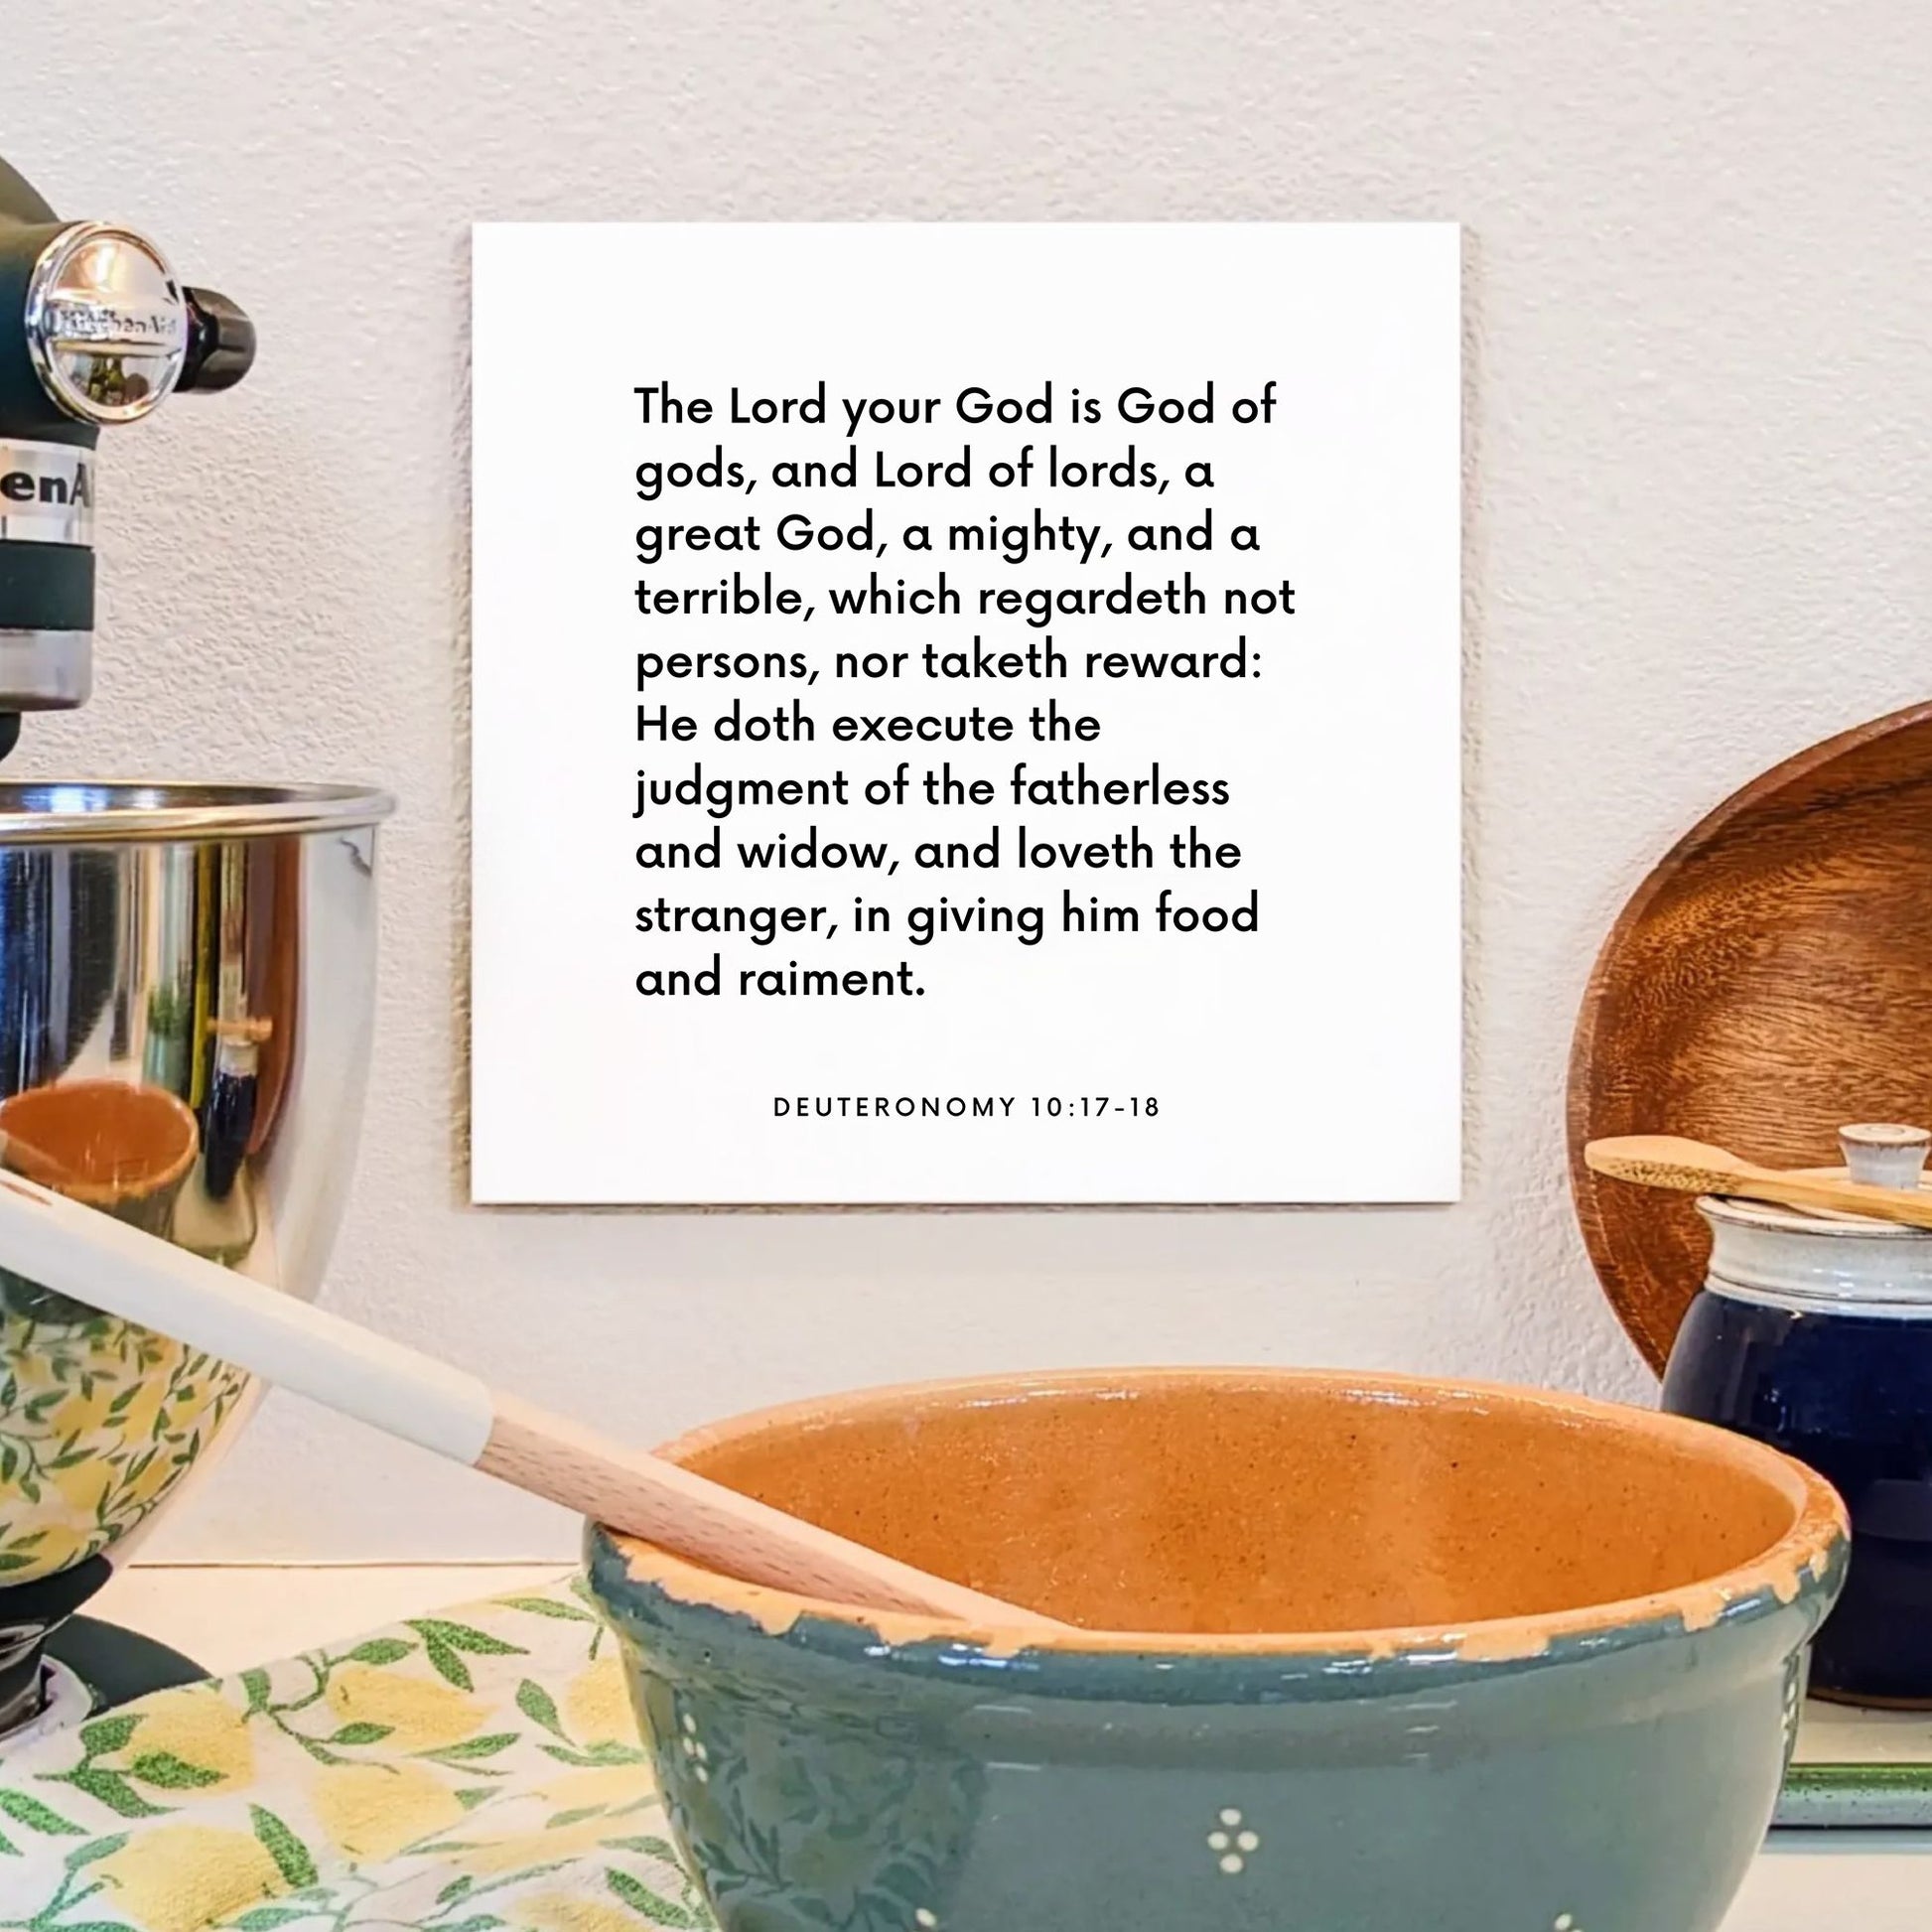 Kitchen mouting of the scripture tile for Deuteronomy 10:17-18 - "The Lord your God is God of gods"